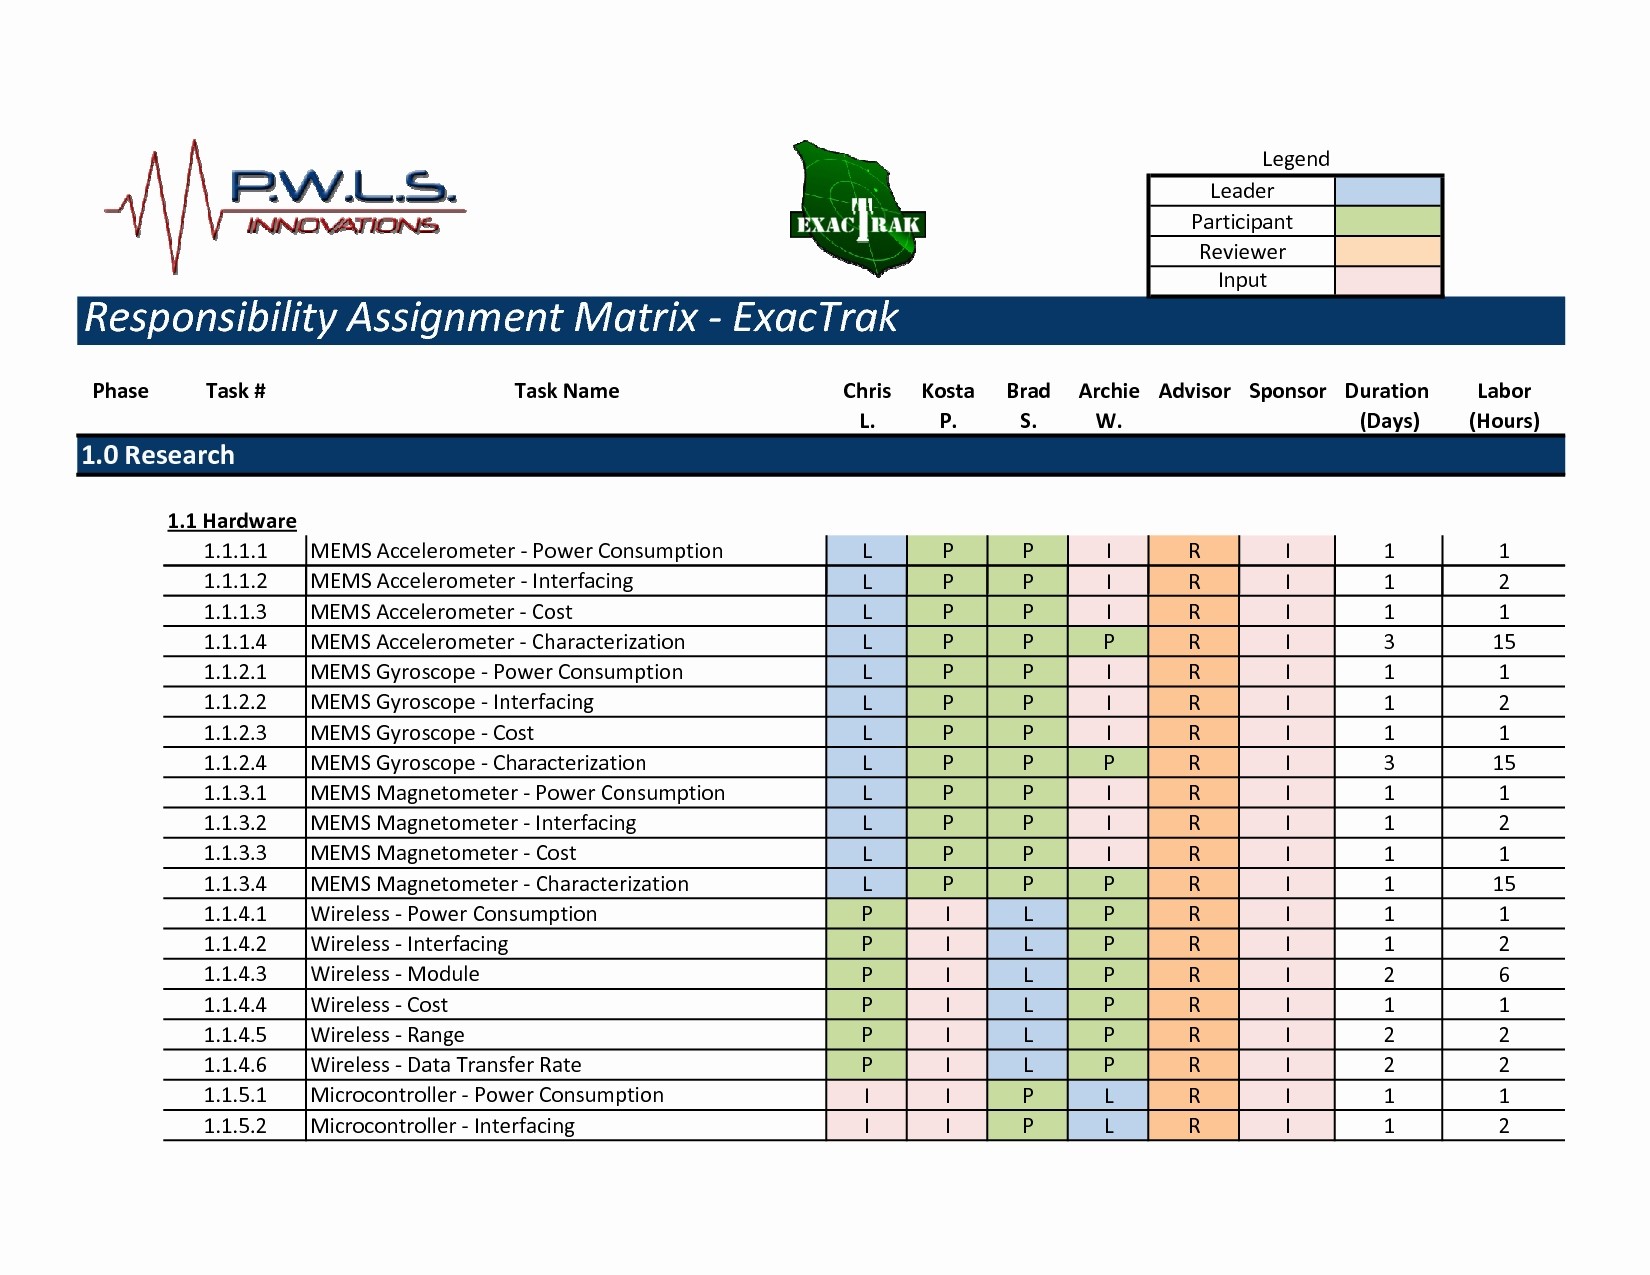 50 Awesome Resource Allocation Matrix Template DOCUMENTS IDEAS Document